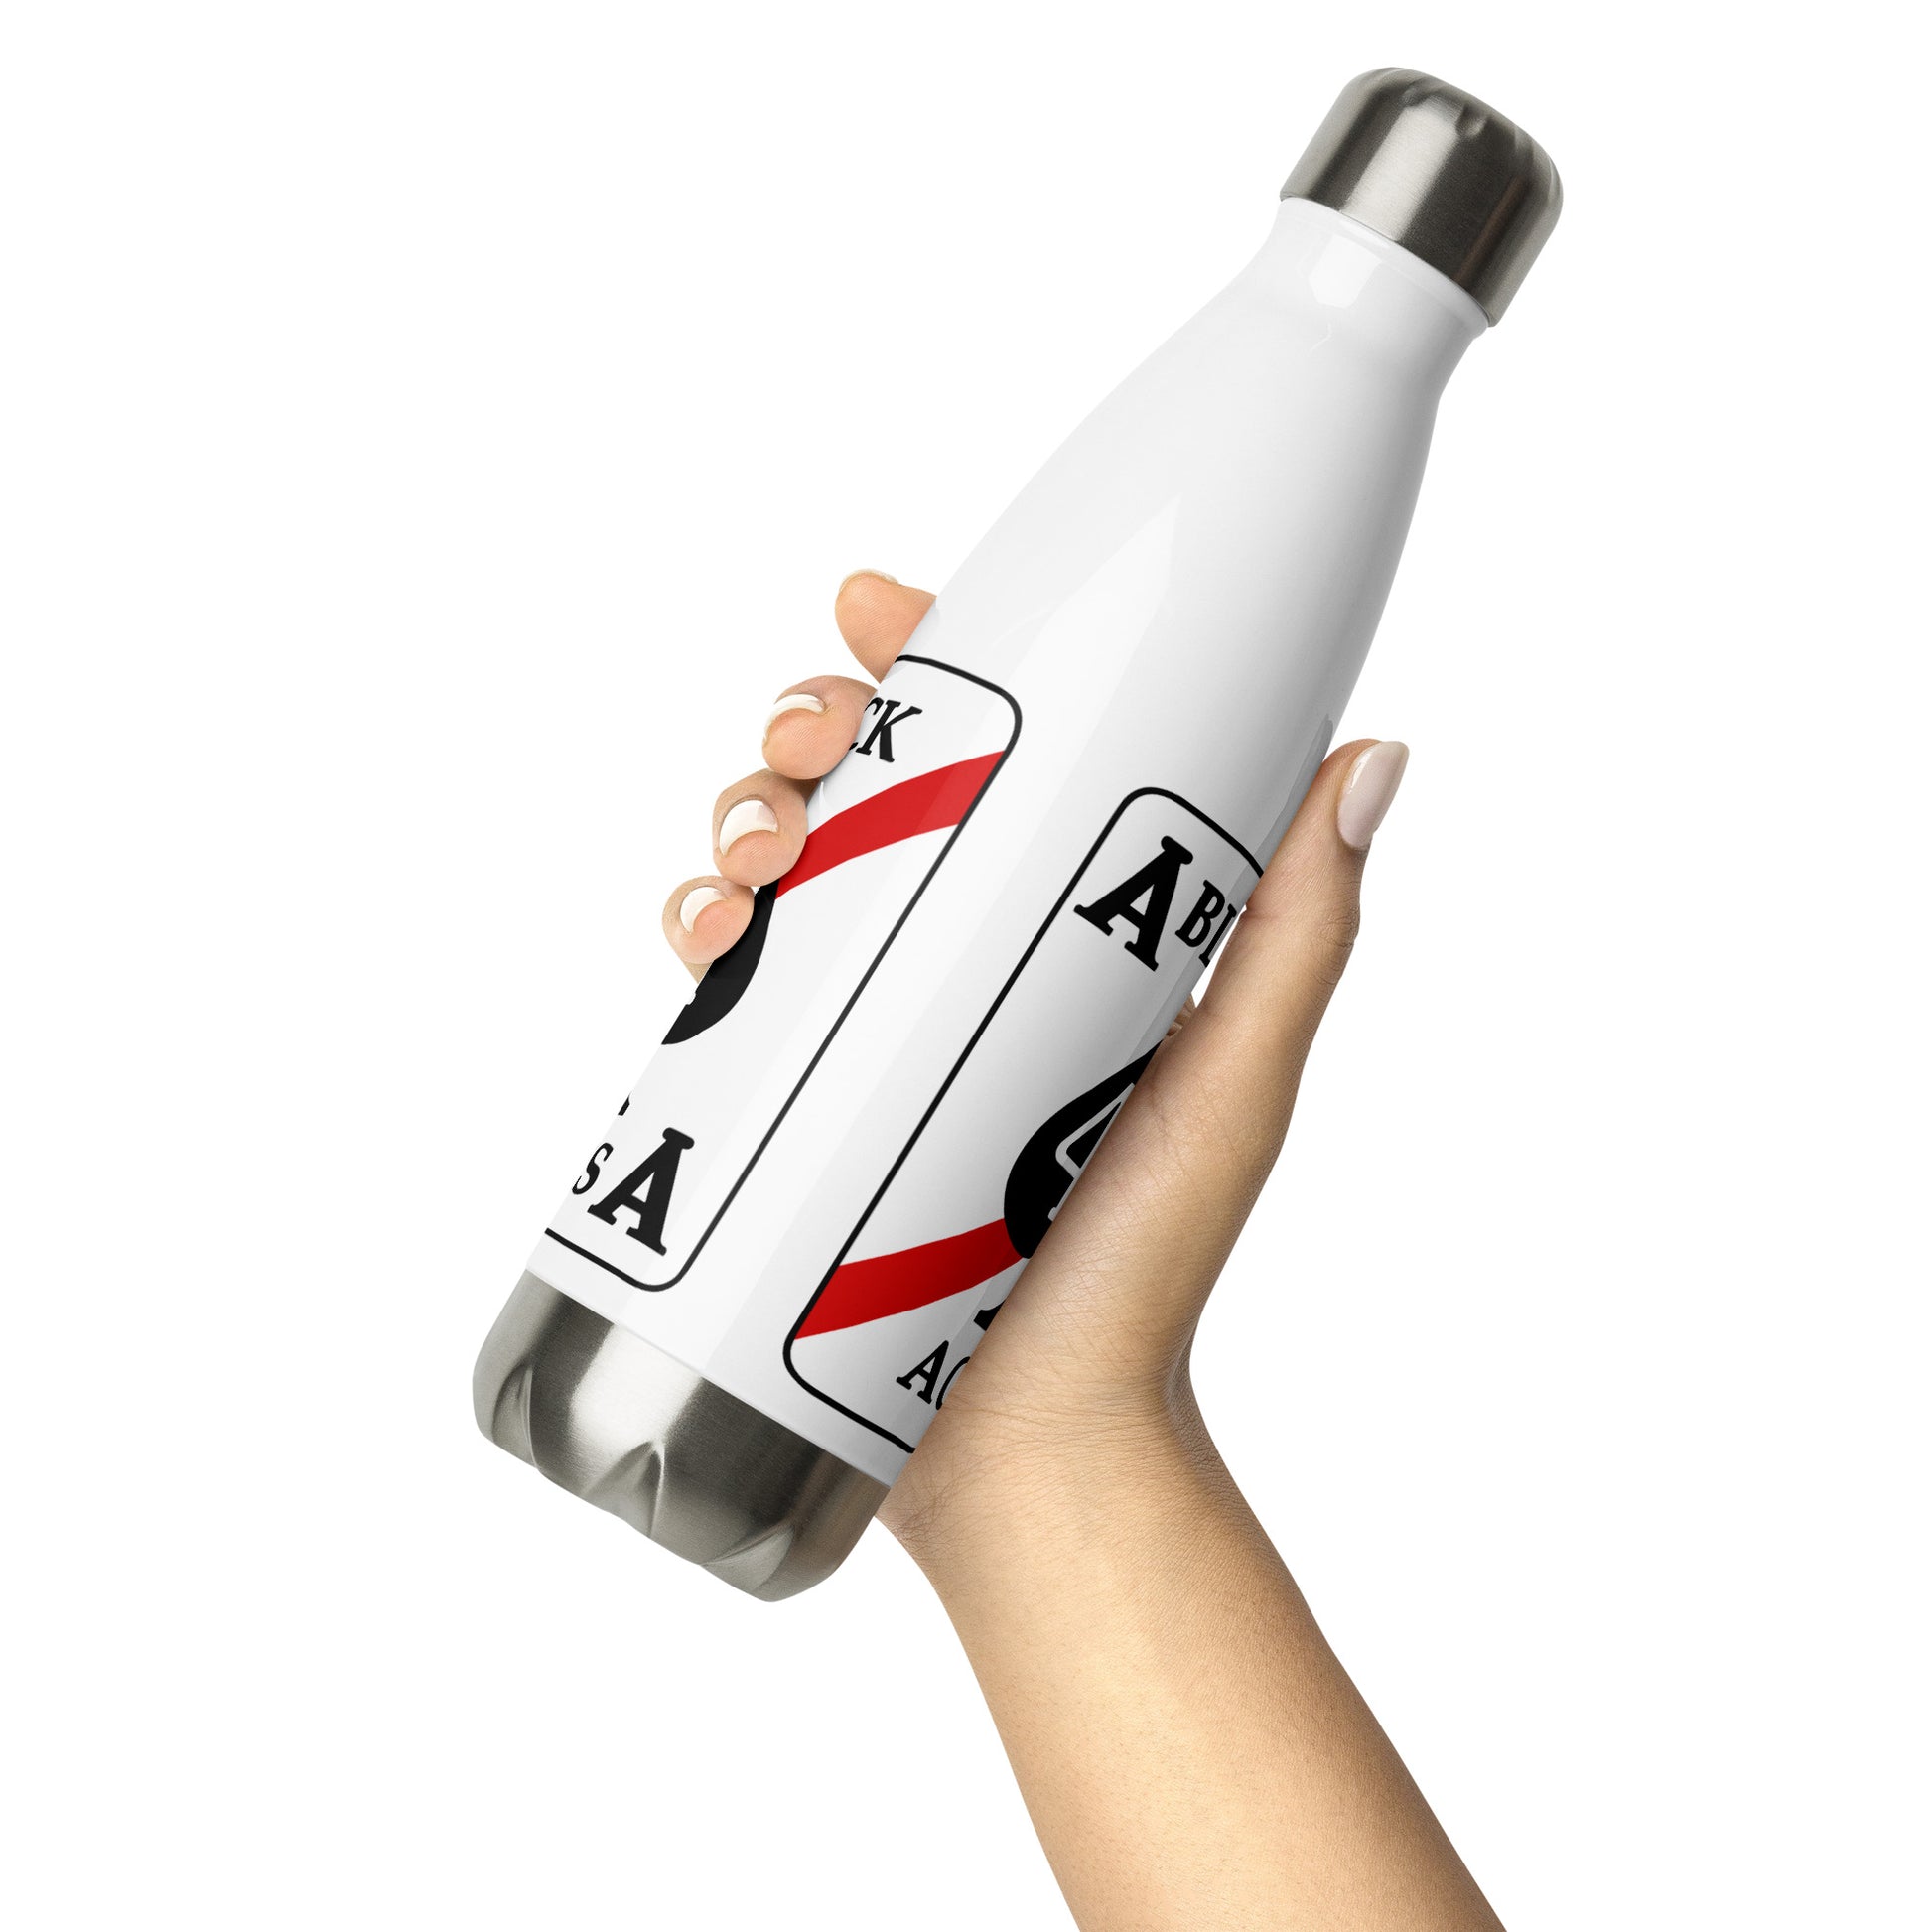 Black Aces VF-41 Insignia Stainless Steel Water Bottle